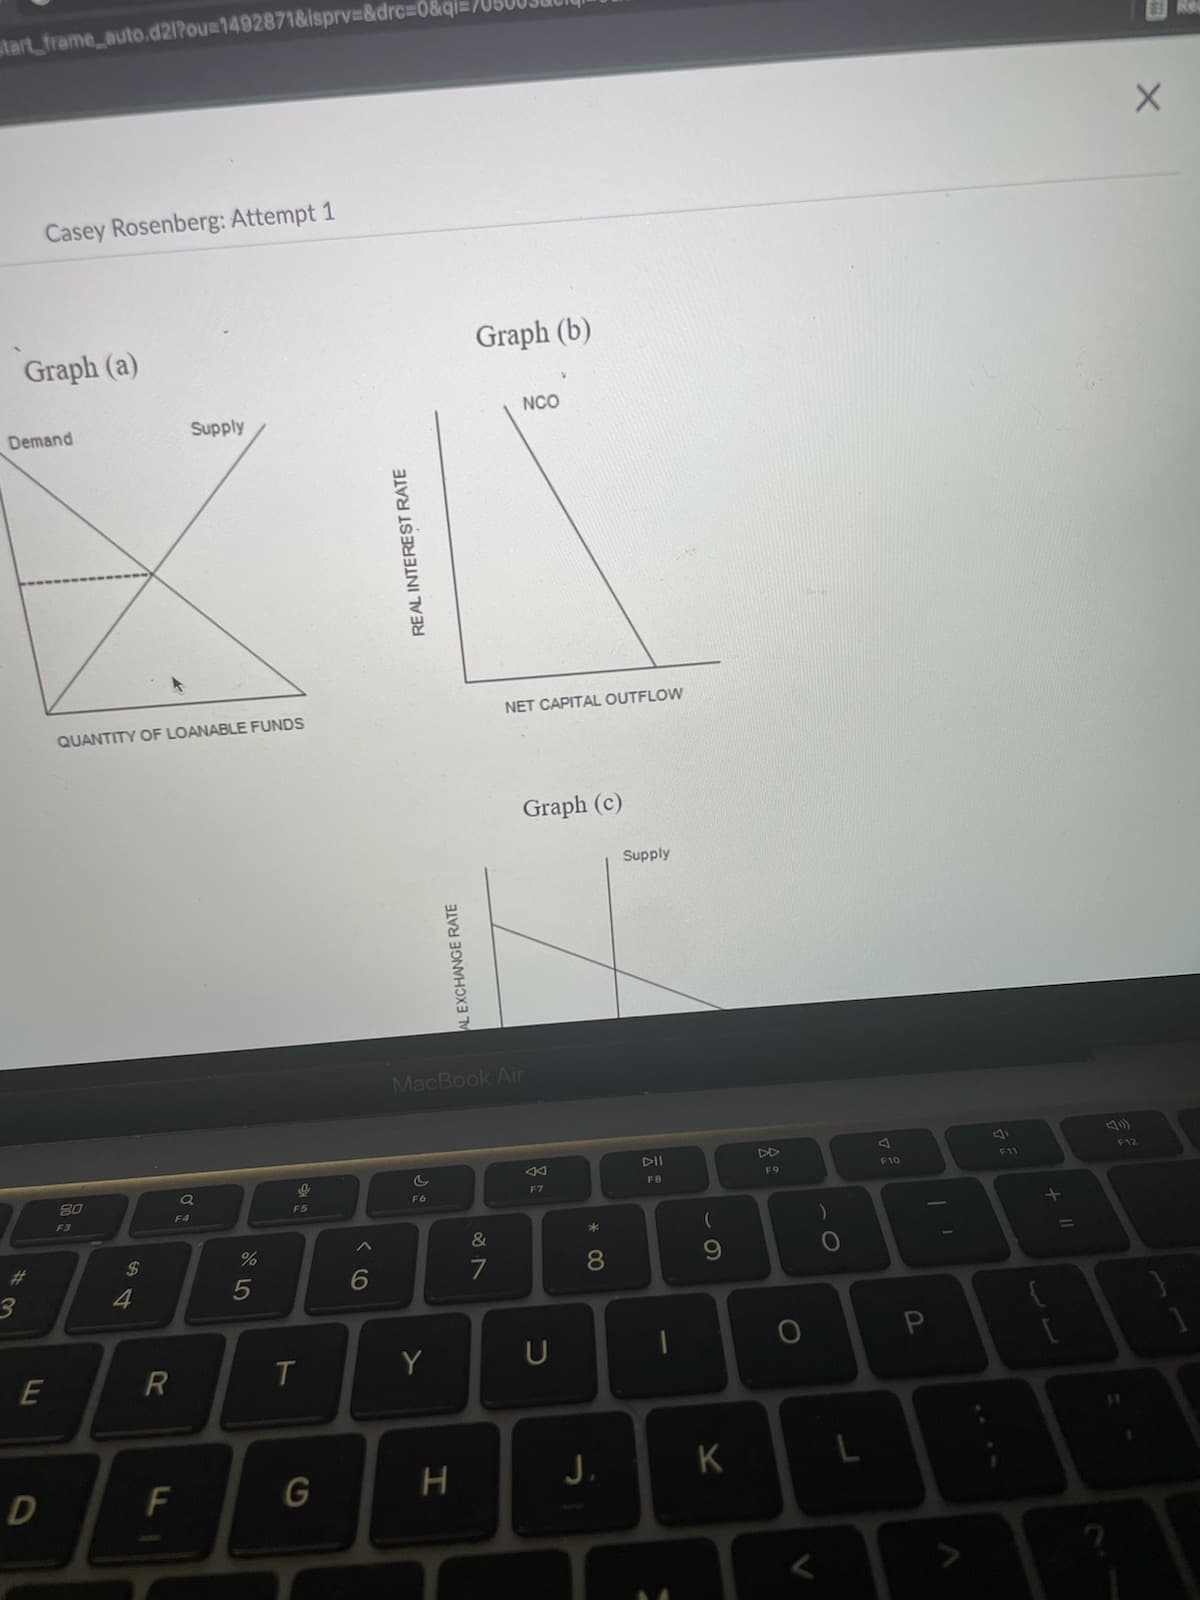 start_frame auto.d21?ou=1492871&isprv=&drc%=0&qi=/
Casey Rosenberg: Attempt 1
Graph (a)
Graph (b)
NCO
Demand
Supply
NET CAPITAL OUTFLOW
QUANTITY OF LOANABLE FUNDS
Graph (c)
Supply
MacBook Air
DII
F12
F10
F11
F9
80
F7
F8
F6
F5
F4
F3
23
24
7
8.
4
Y
U
P
D
G
J.
K
AL EXCHANGE RATE
REAL INTEREST RATE
